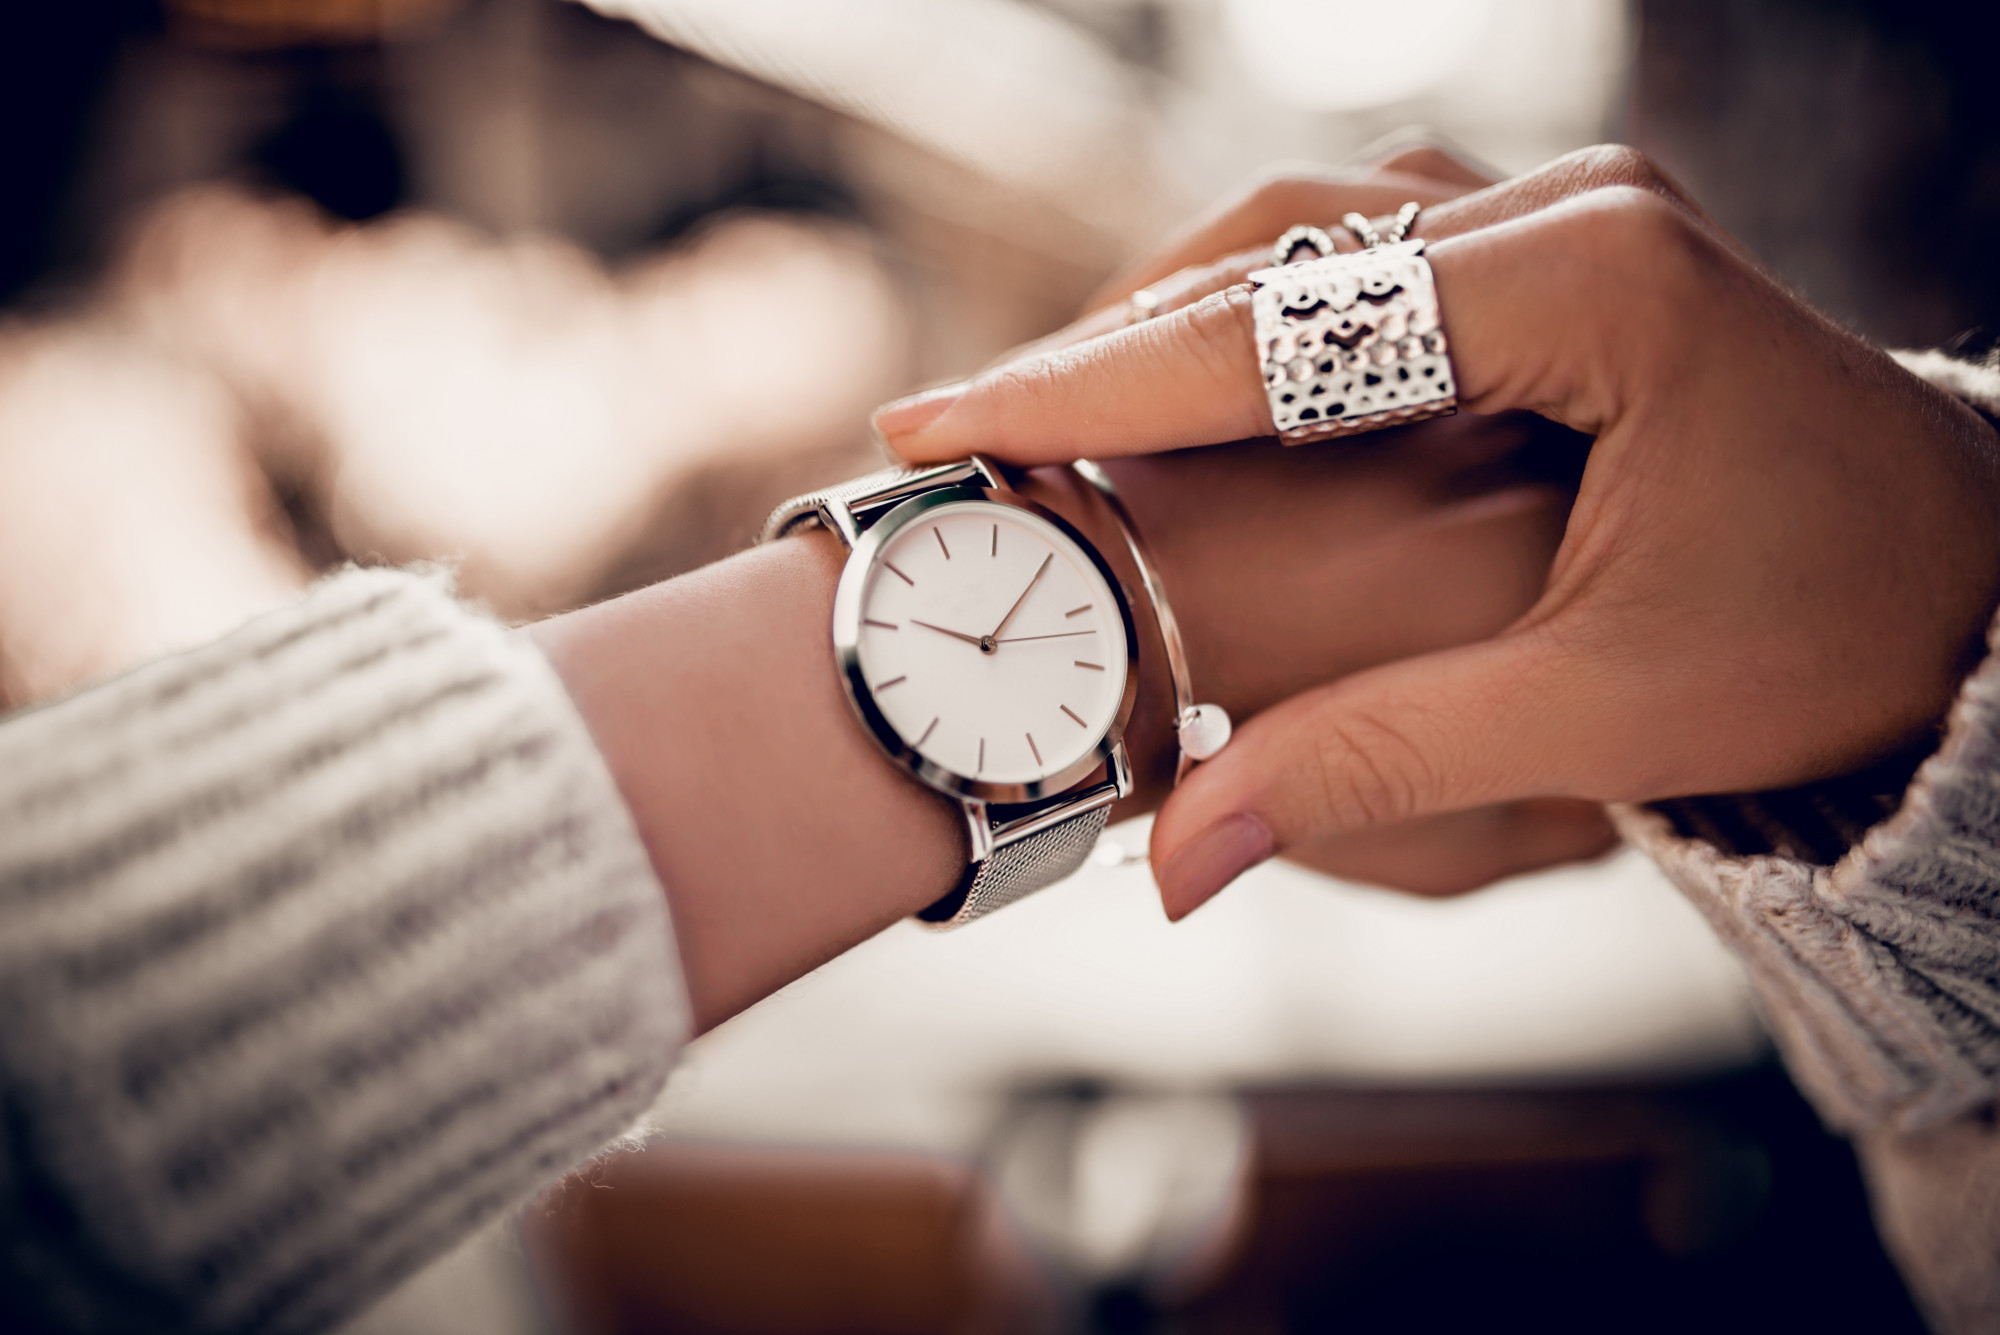 Do You Have the Time? Why A Stylish Watch Is Still a Fashion Staple